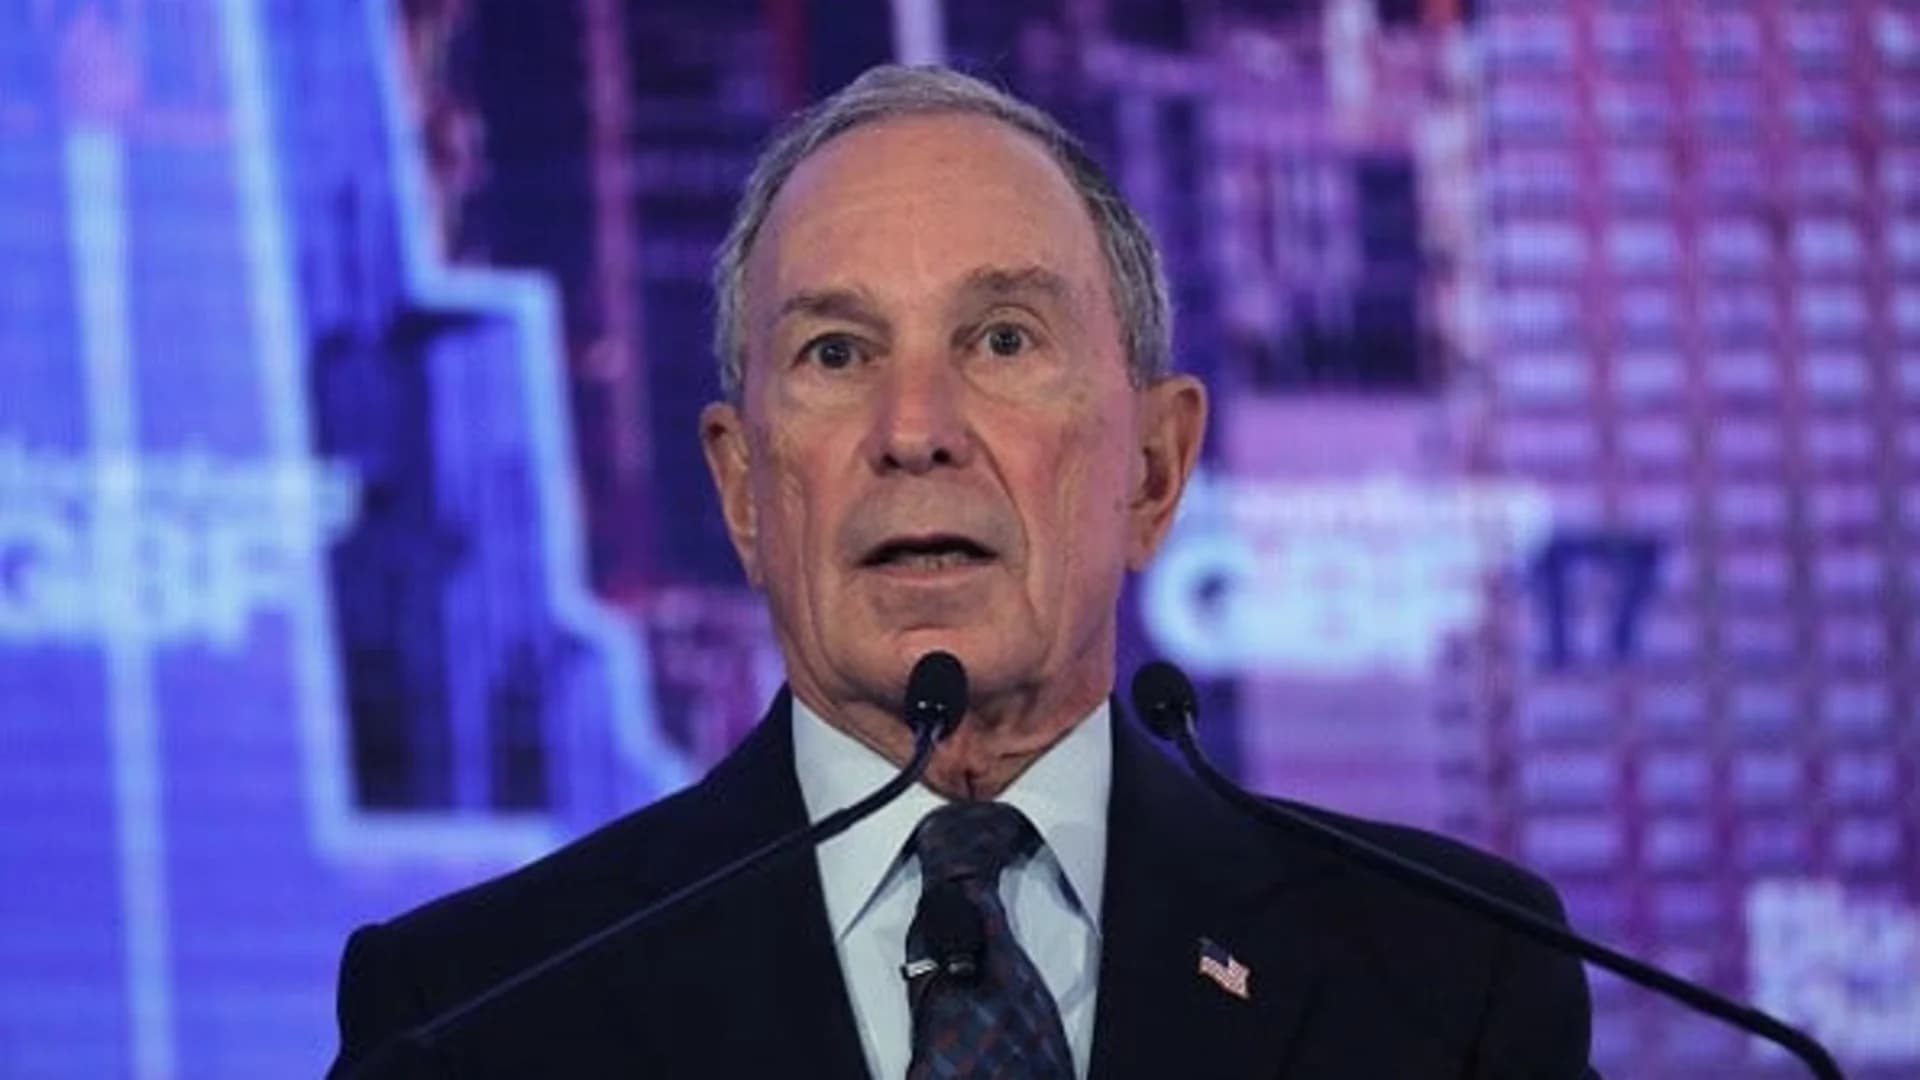 Bloomberg won't release women from nondisclosure agreements